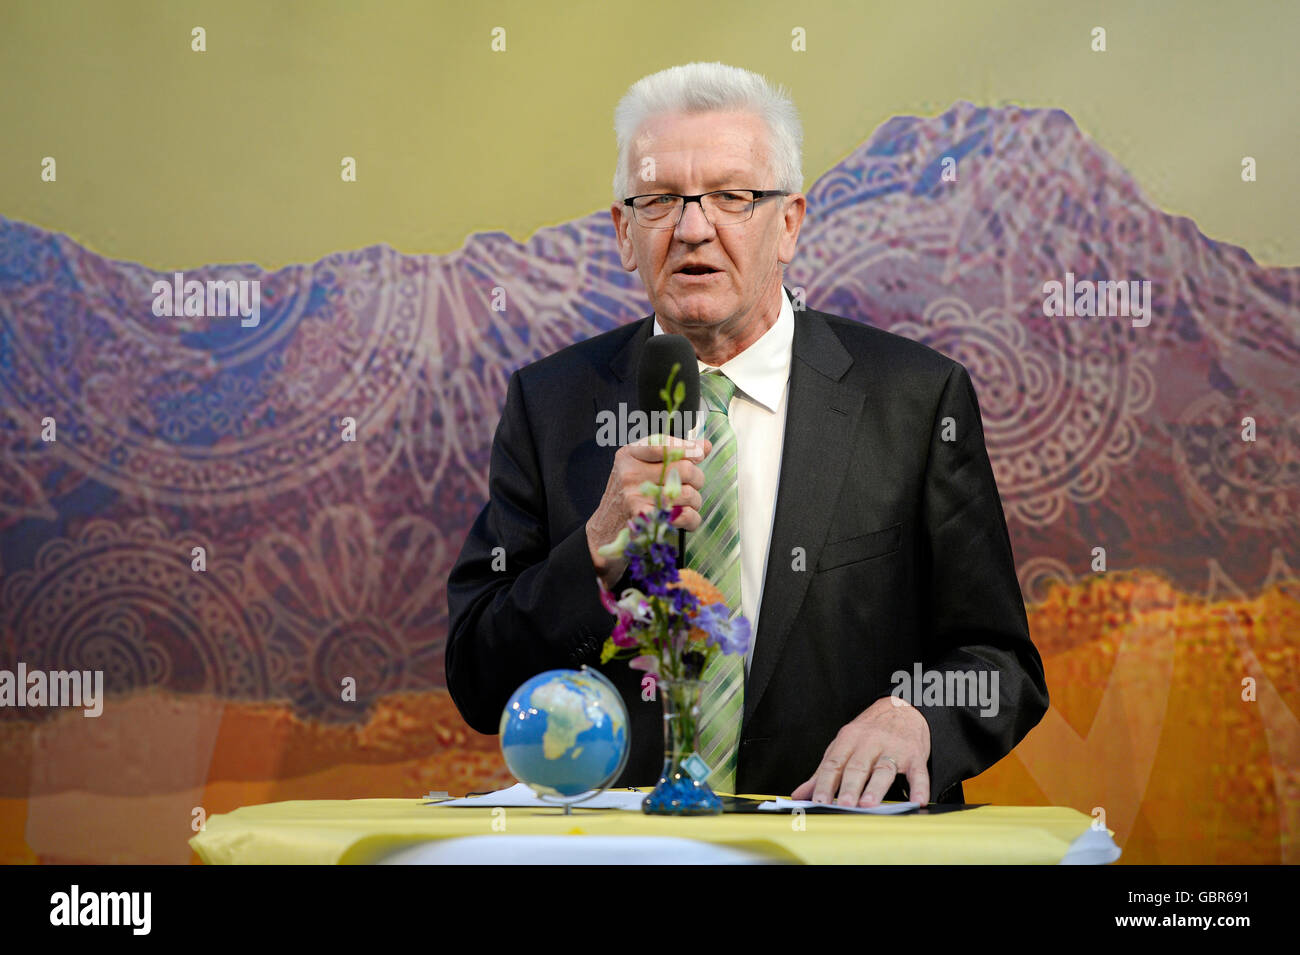 Winfried Kretschmann (Buendnis 90/Die Gruenen), premier of the German state of Baden-Wuerttemberg, speaking at the Stallwaechterparty of the Baden-Wuerrtemberg state representation in Berlin, Germany, 7 July 2016. The party traditionally takes place at the start of the parliamentary summer break. PHOTO: MAURIZIO GAMBARINI/DPA Stock Photo